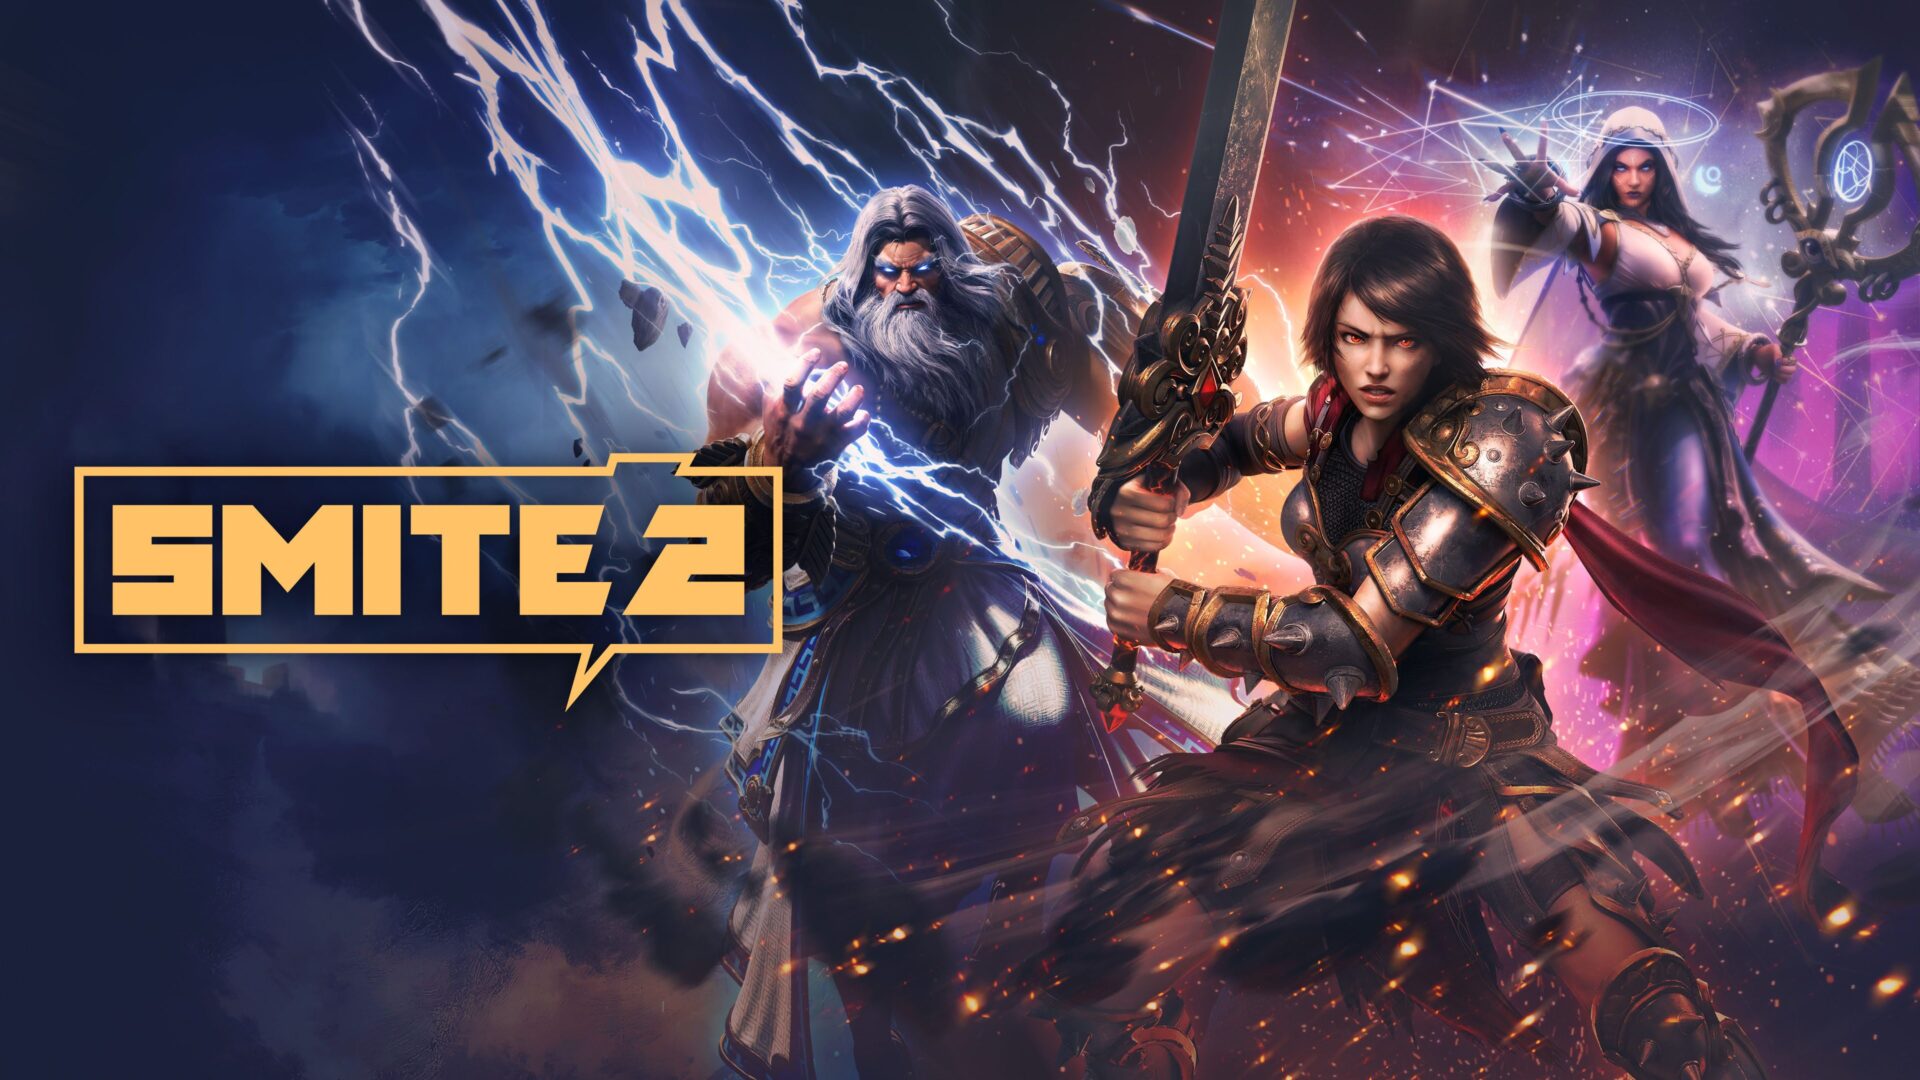 Smite 2 announced during Smite World Championships VGC